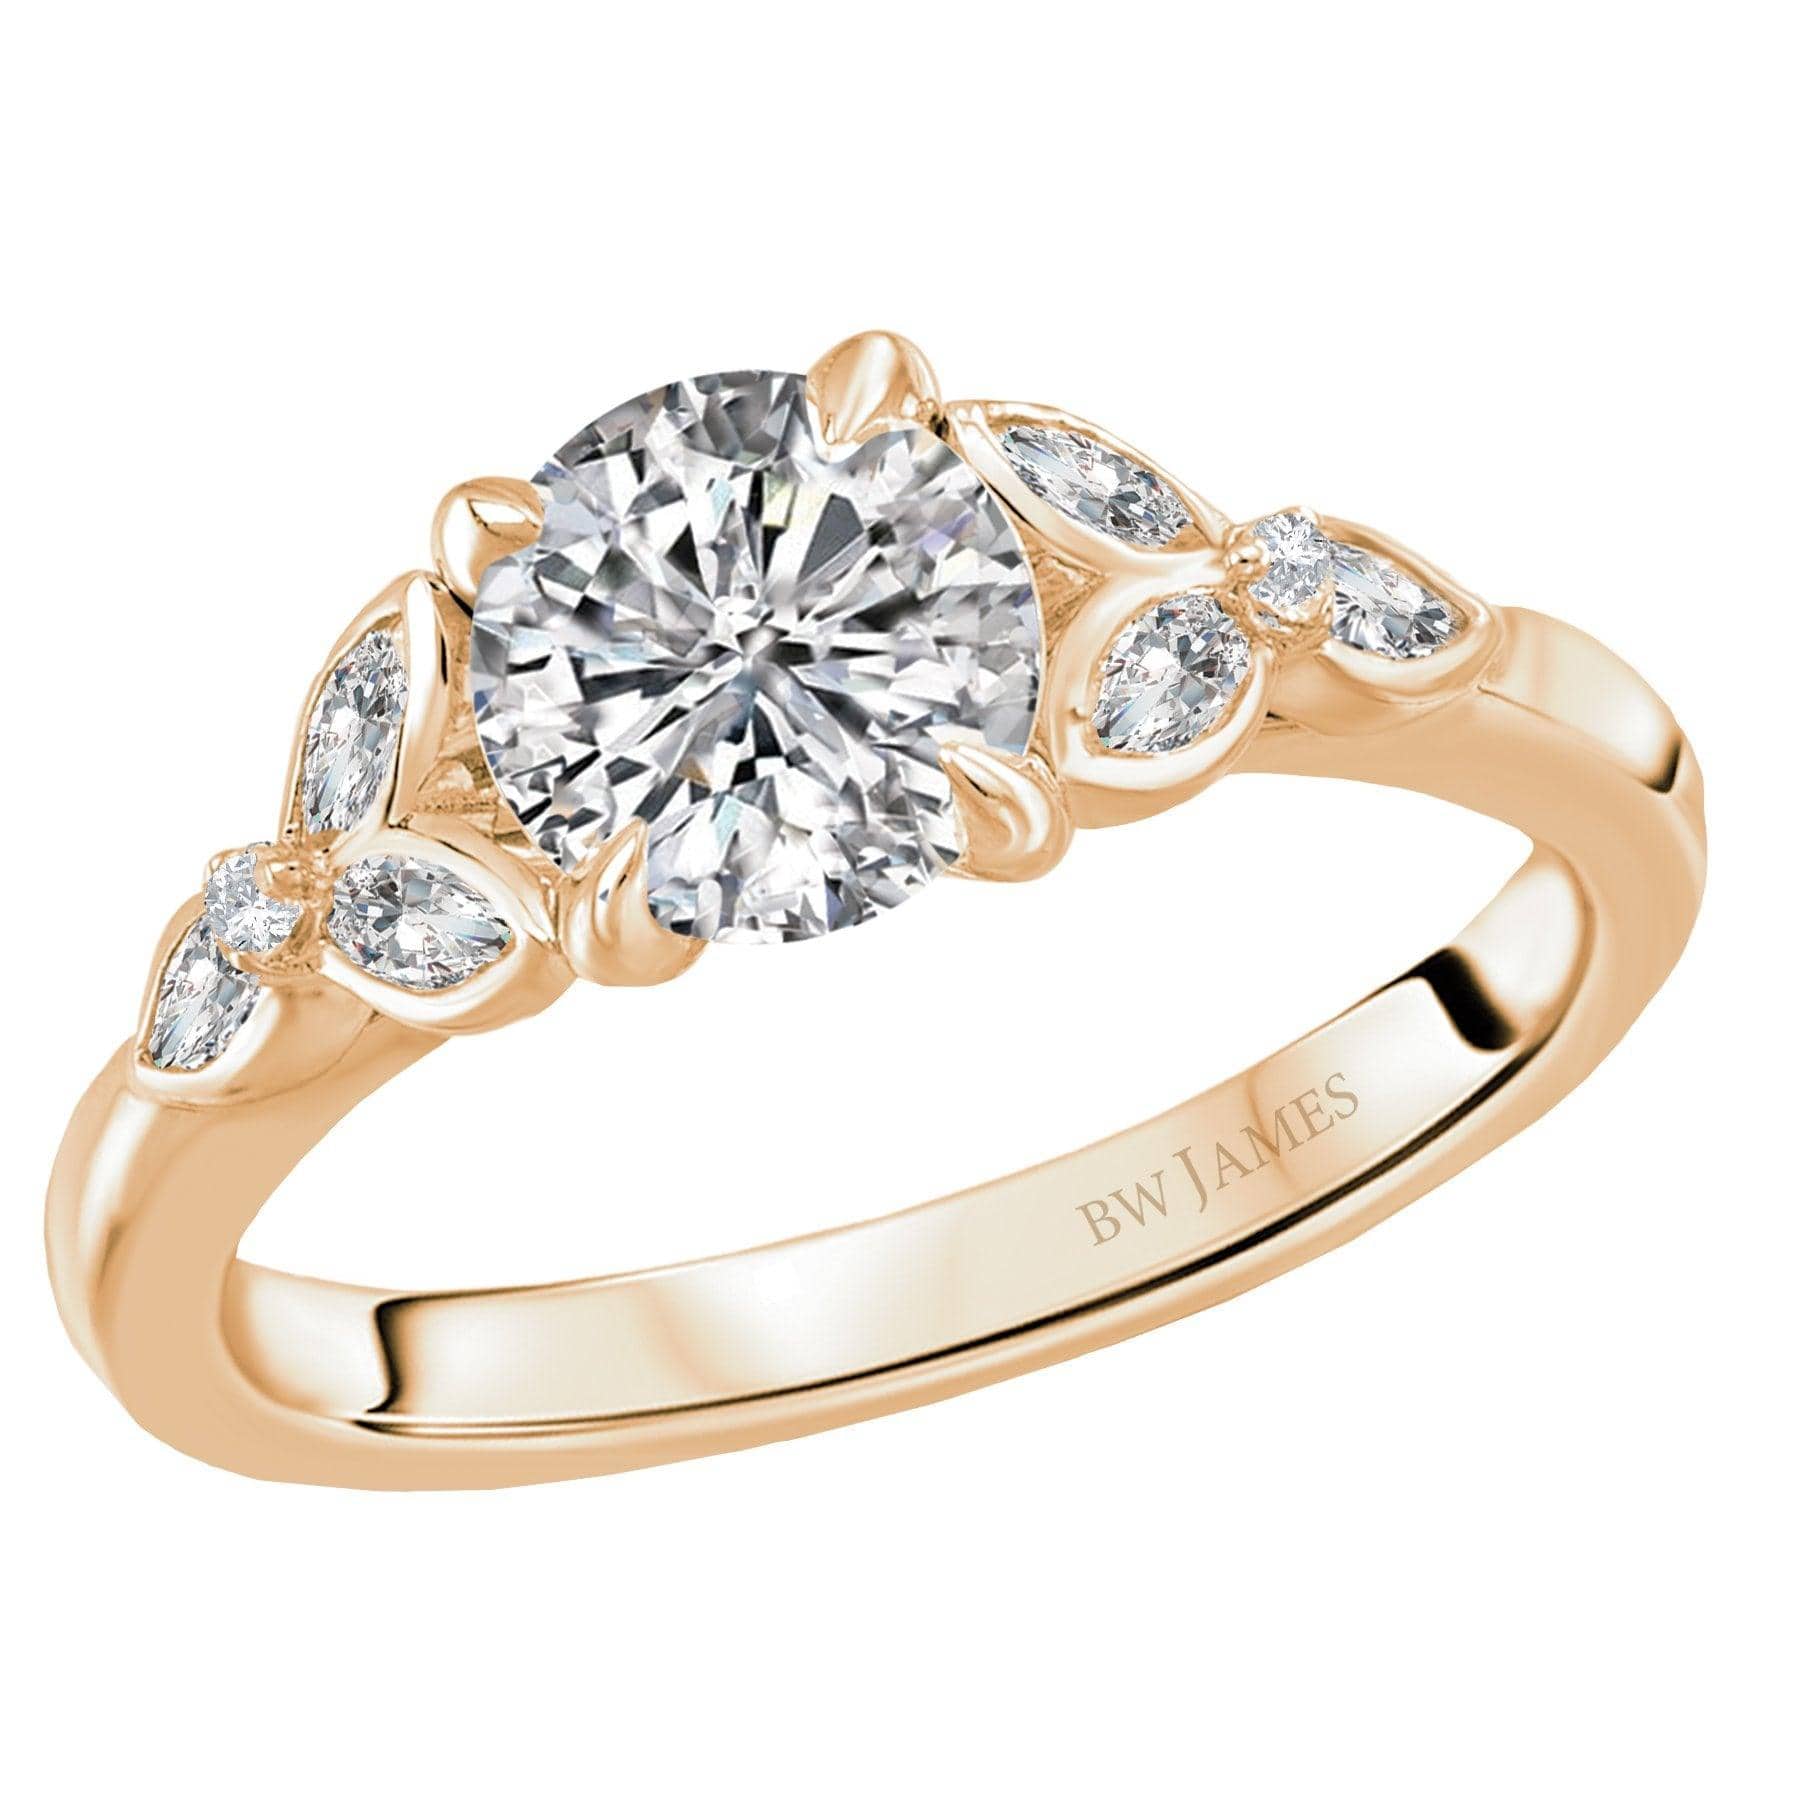 BW JAMES Engagement Rings "The Garden City" Classic Semi-Mount Floral Design Diamond Ring